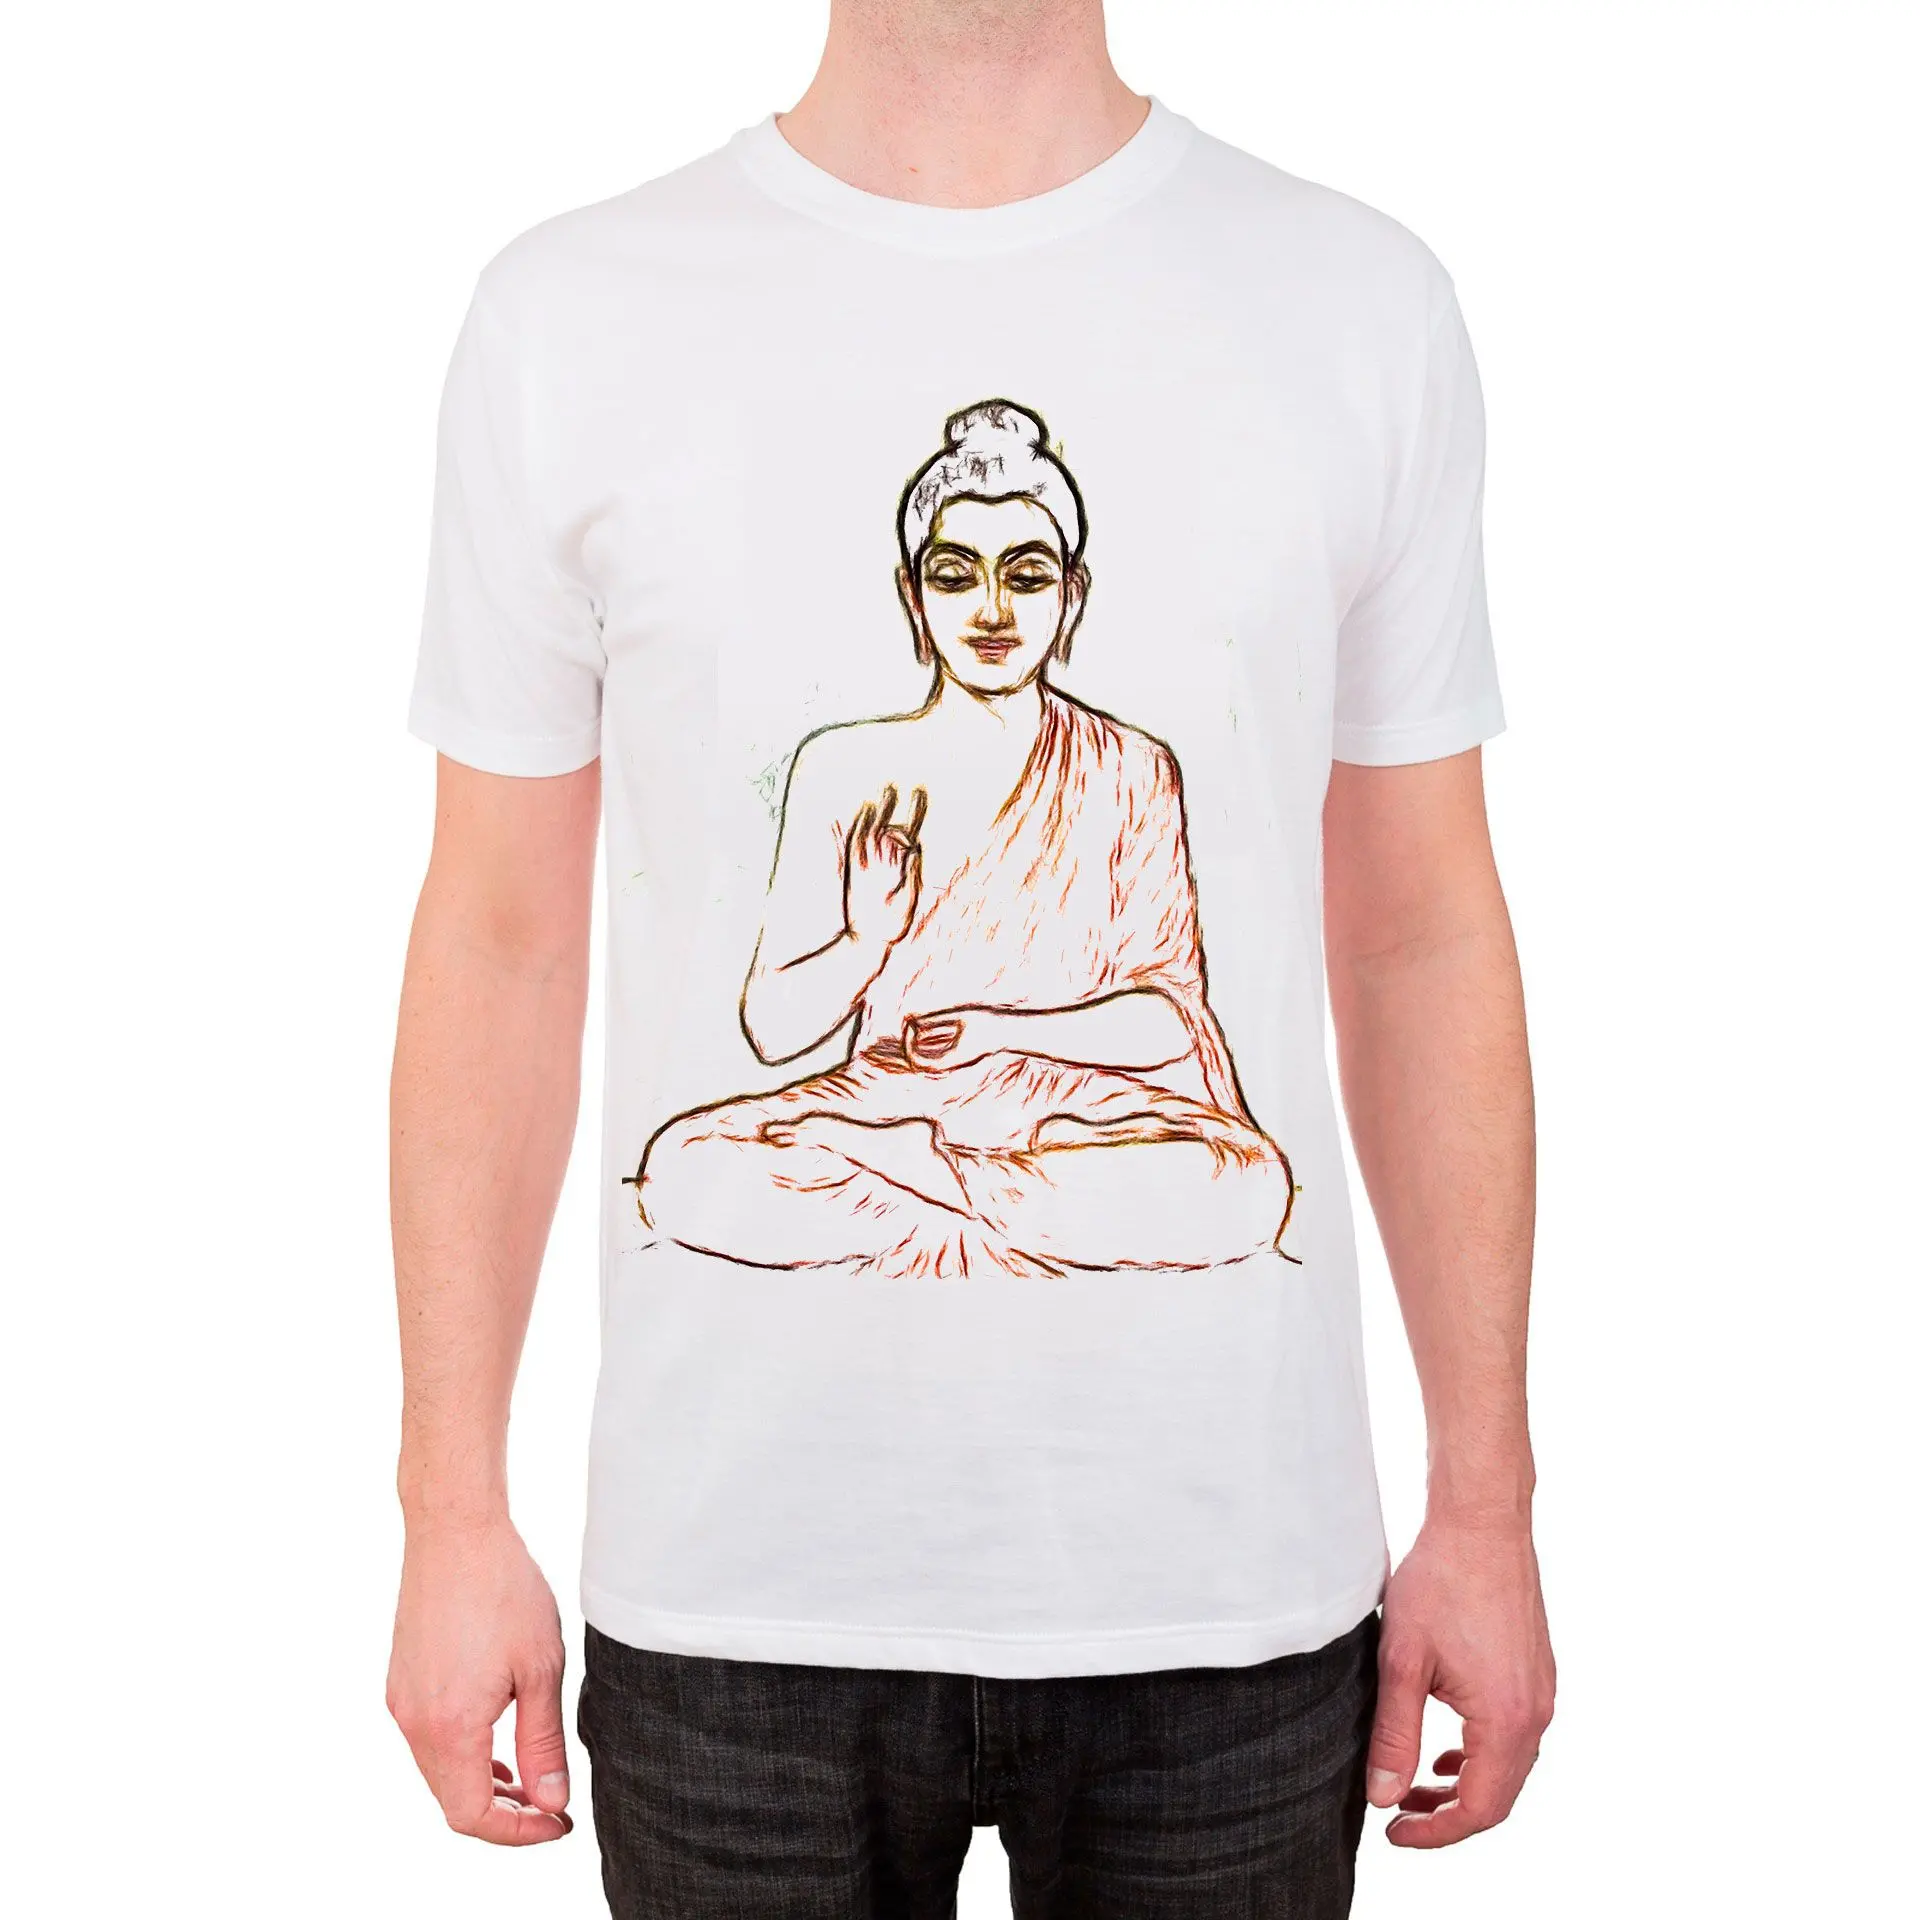 T-shirt with line drawing sketch of budha..